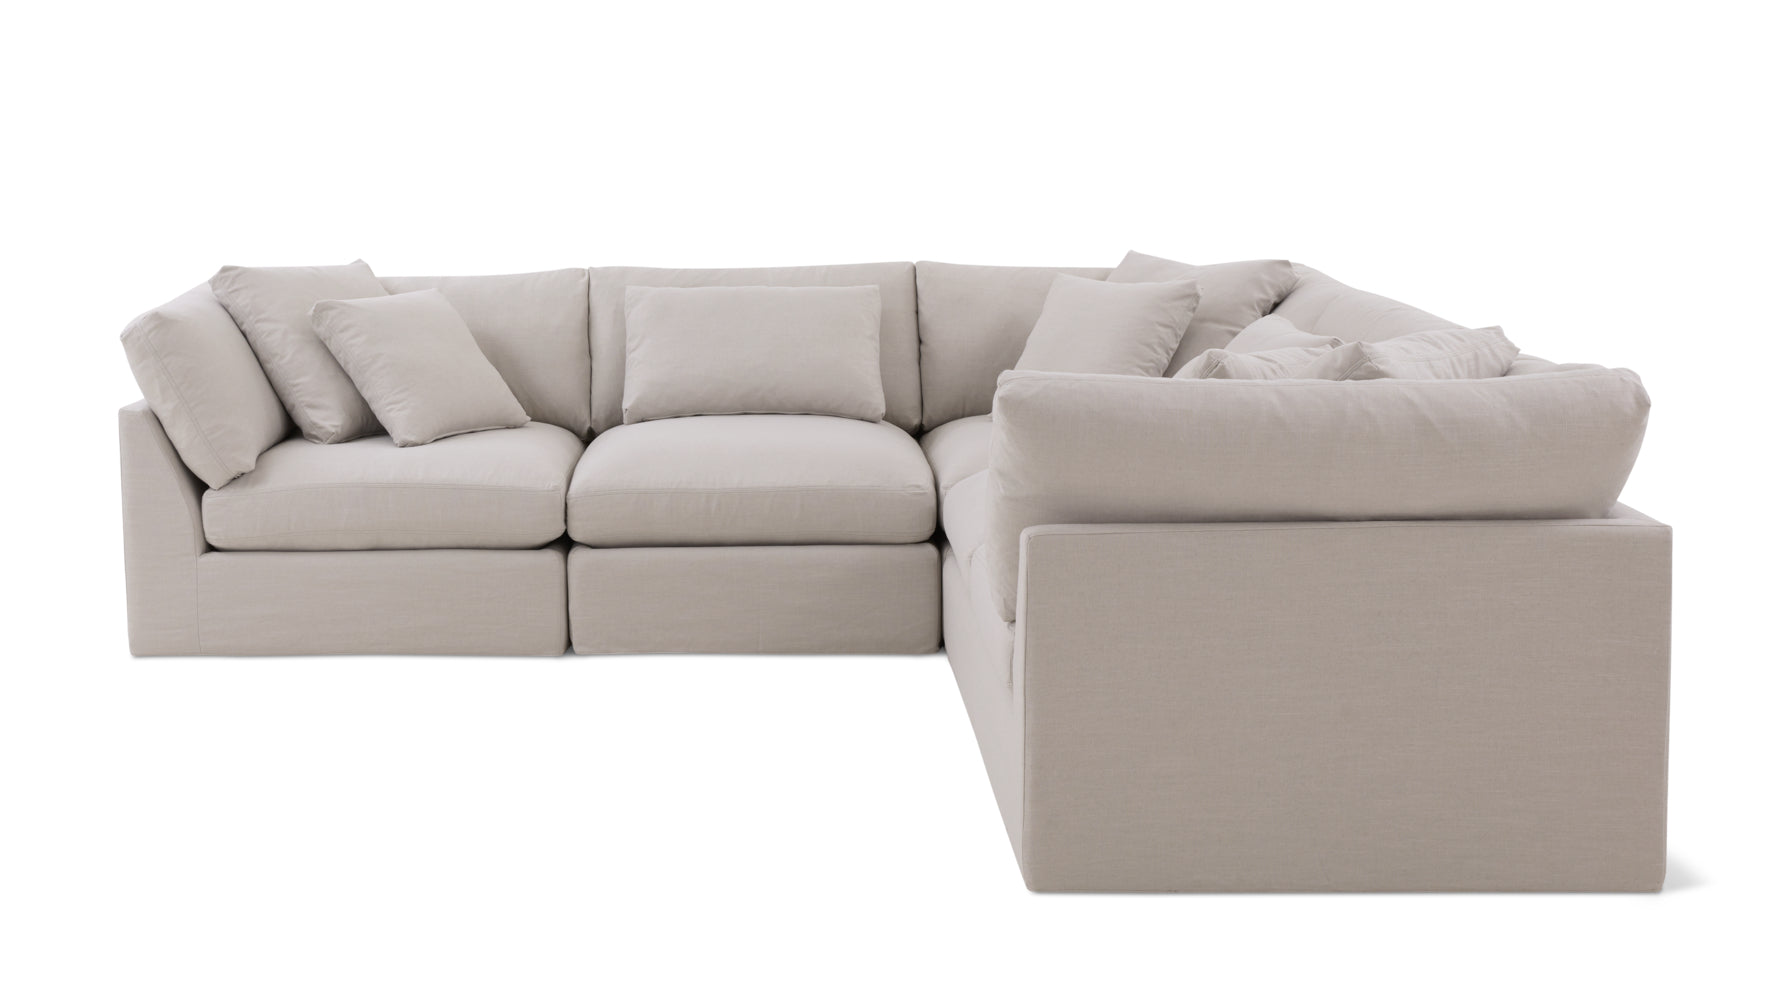 Get Together™ 5-Piece Modular Sectional Closed, Large, Clay - Image 1